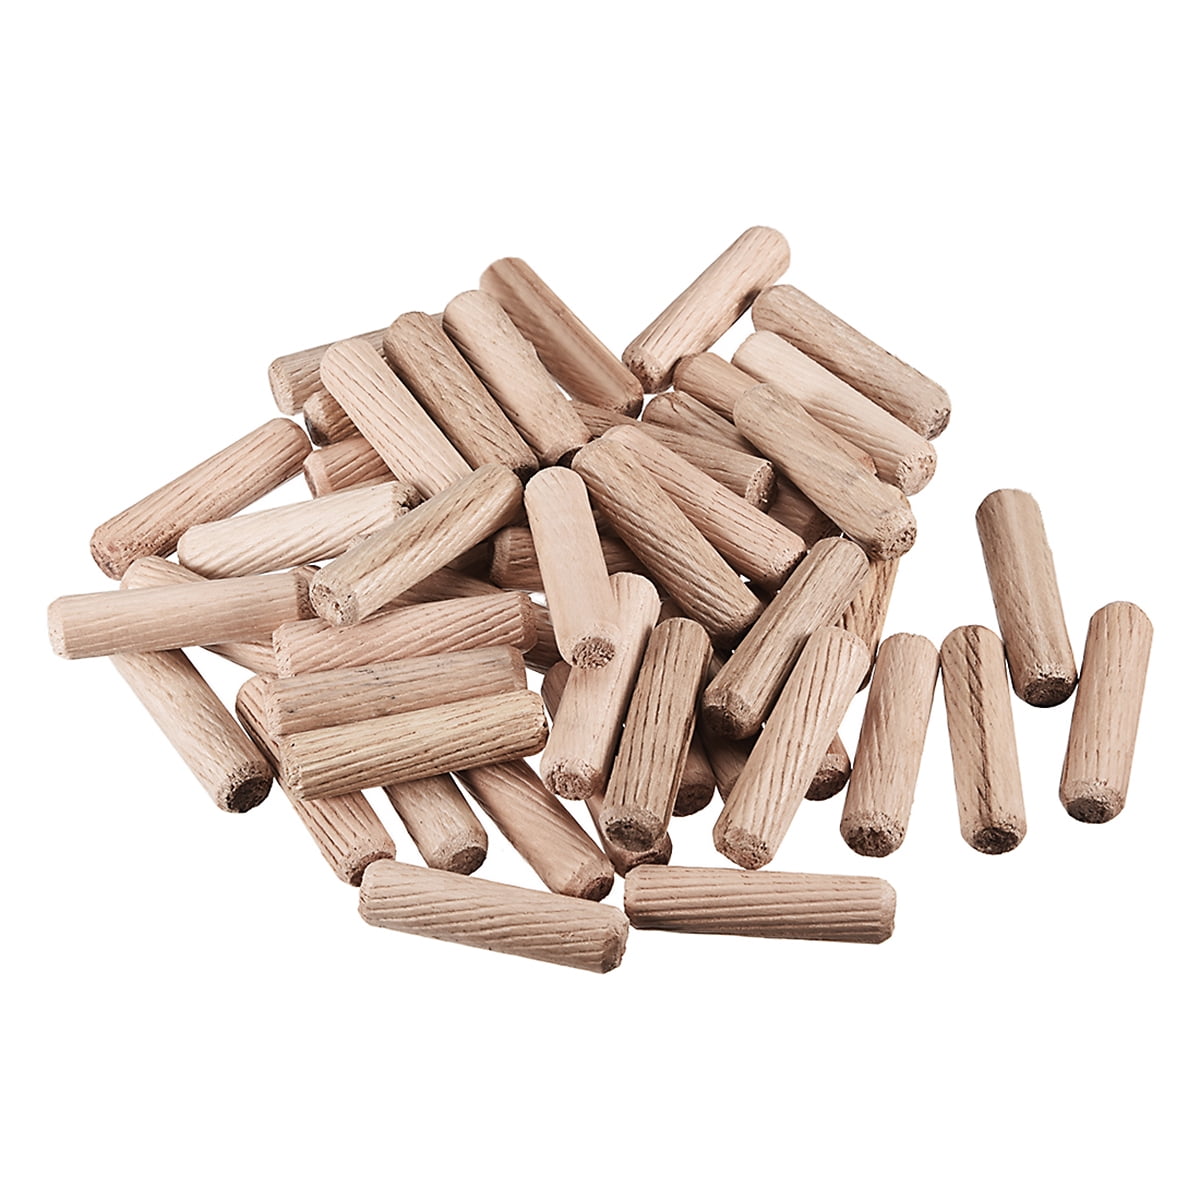 Details about   40  10mm x 45mm HARDWOOD MULTIGROOVE CHAMFERED WOODEN DOWELS FLUTED WOOD 